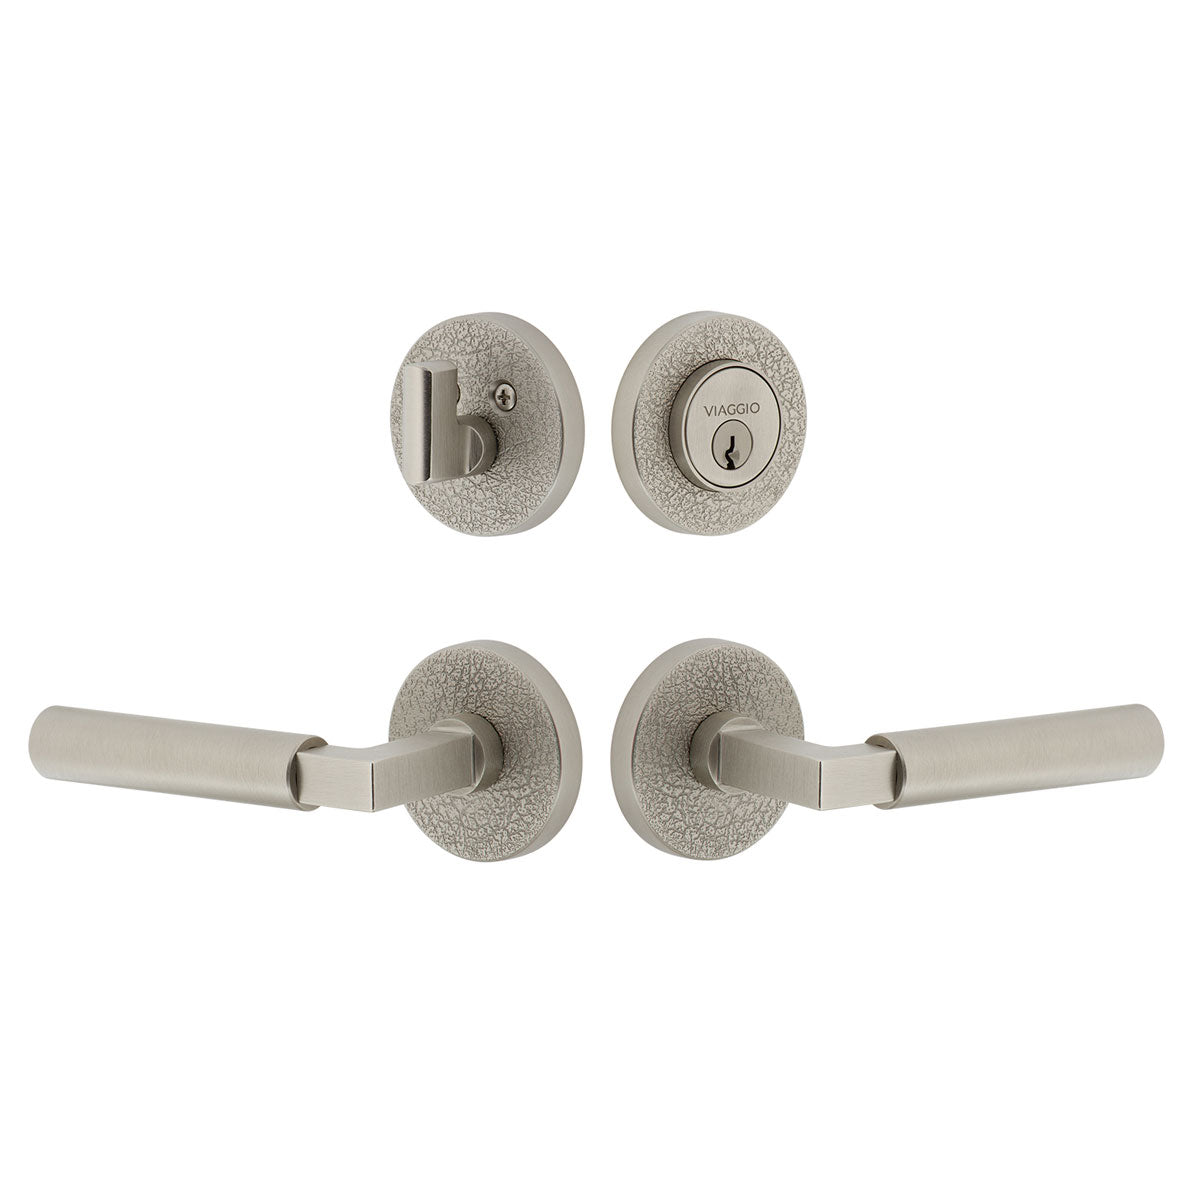 Circolo Leather Rosette Entry Set with Contempo Lever in Satin Nickel